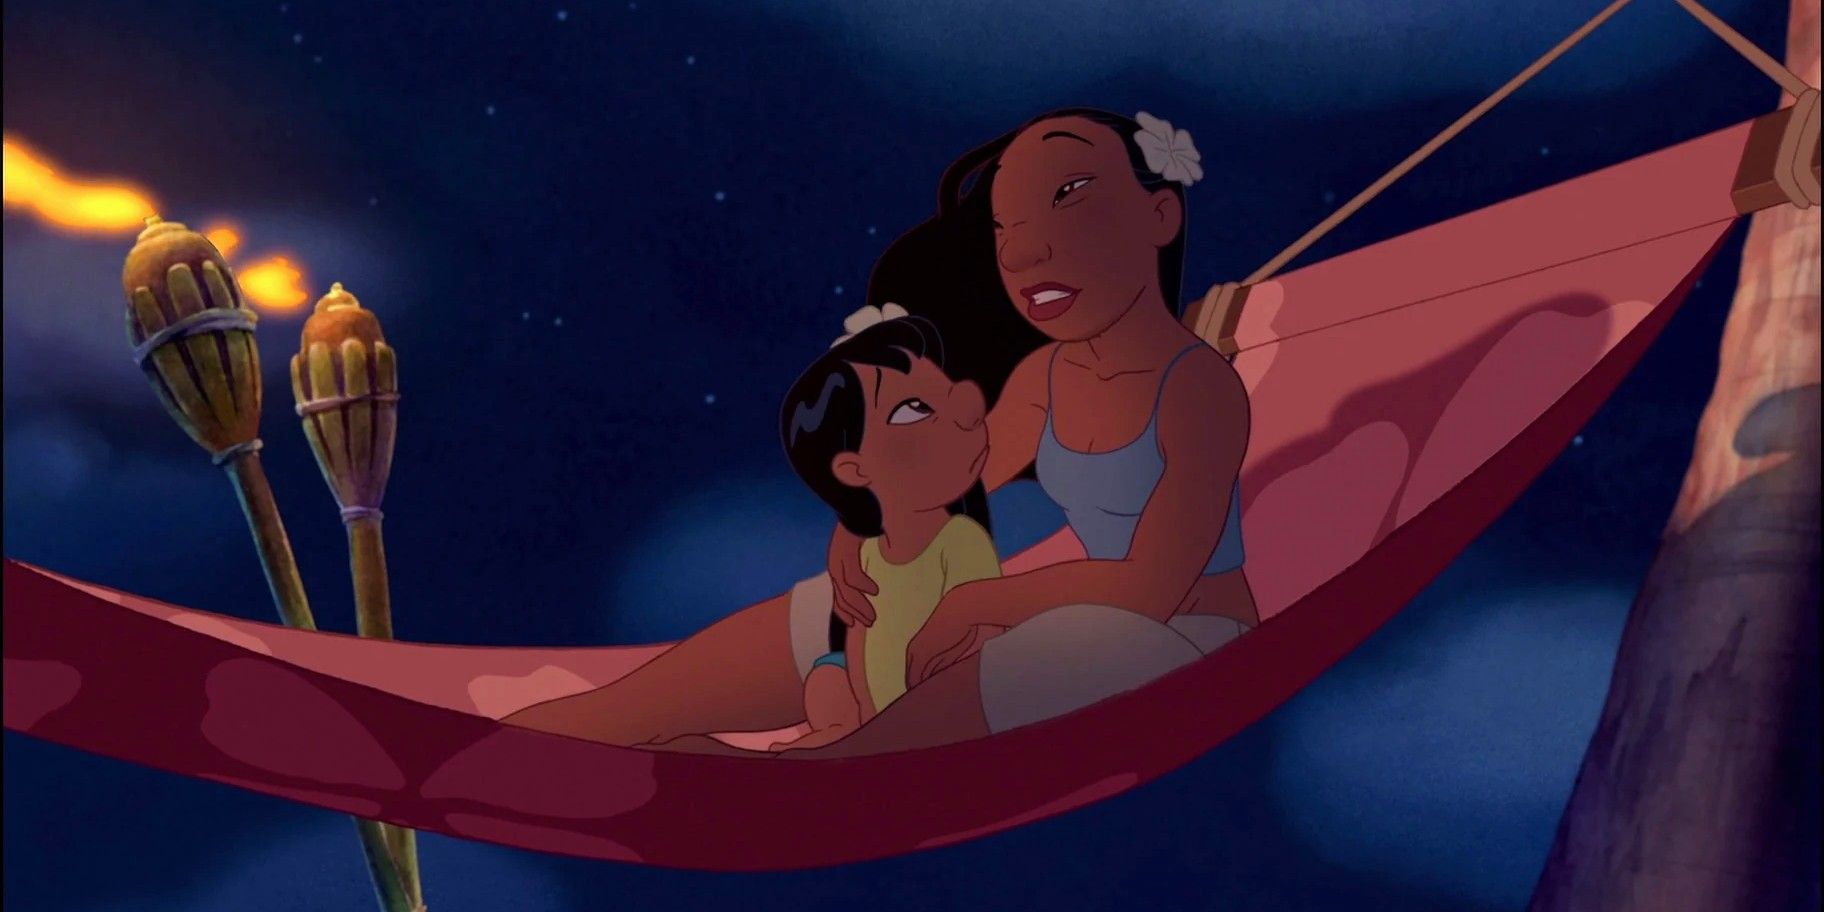 Nani cradles Lilo in a hammock lit by torches against the night sky.